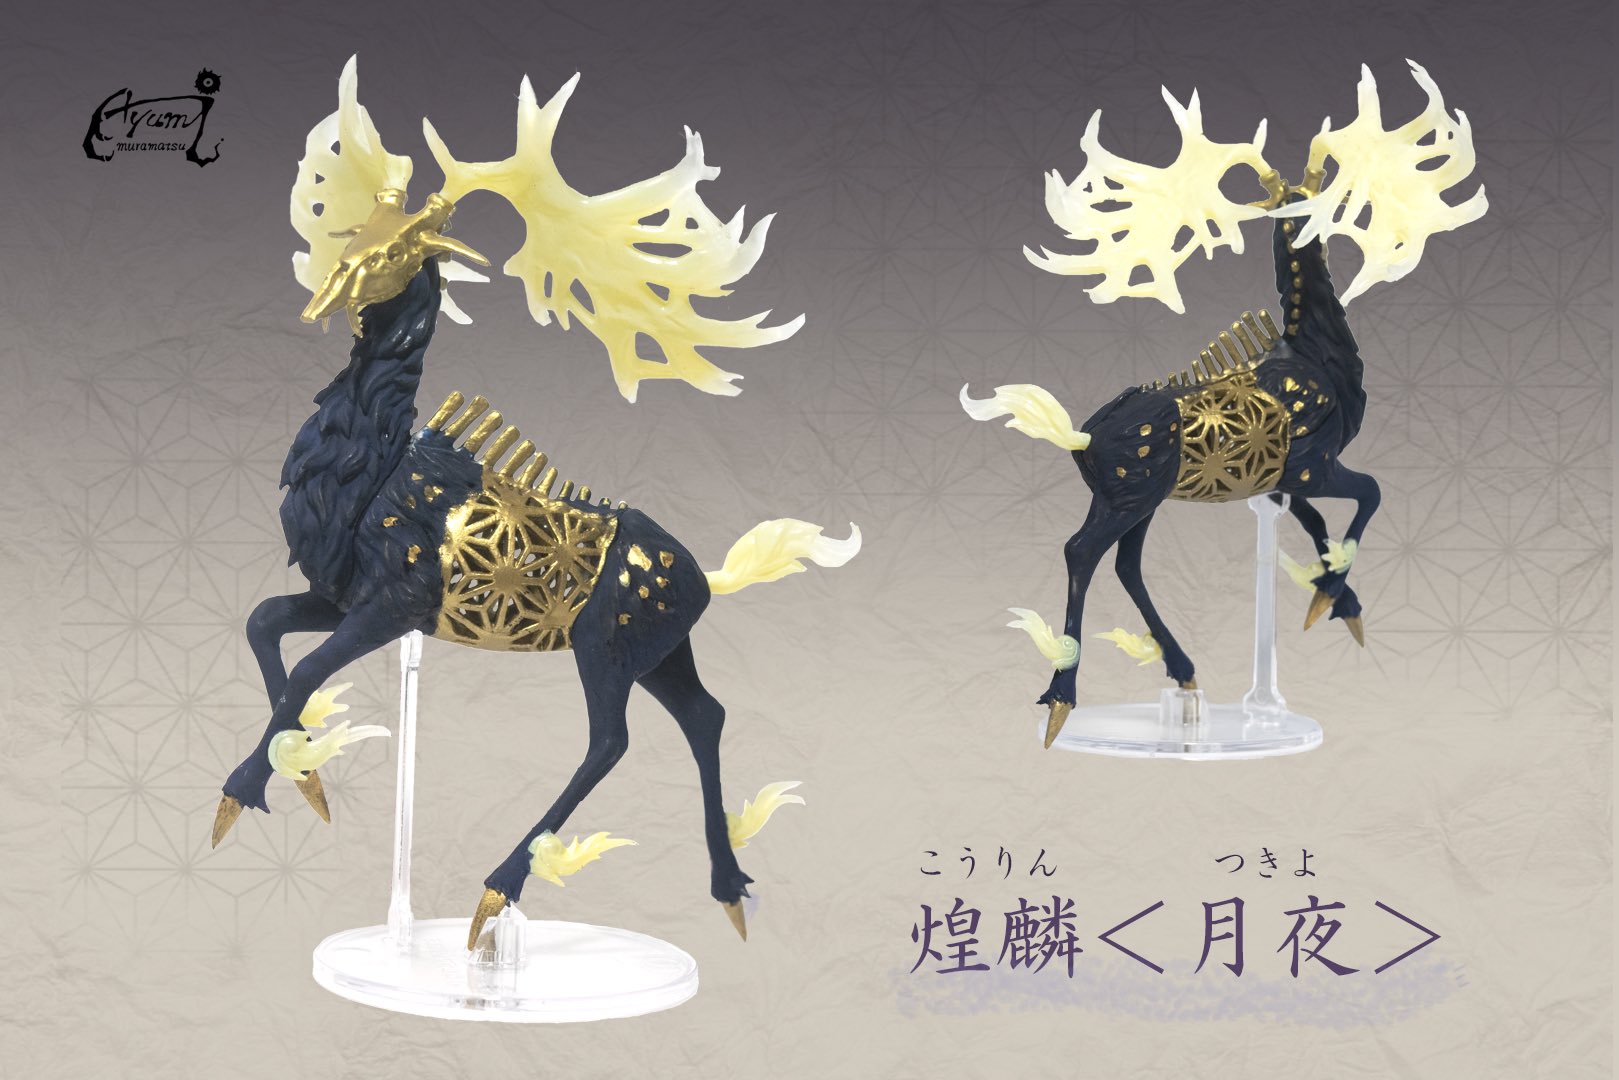 A statue of a deer with horns from the Shenlu Four Seasons Gacha Series at Strangecat Toys, a blind box and art toy store.